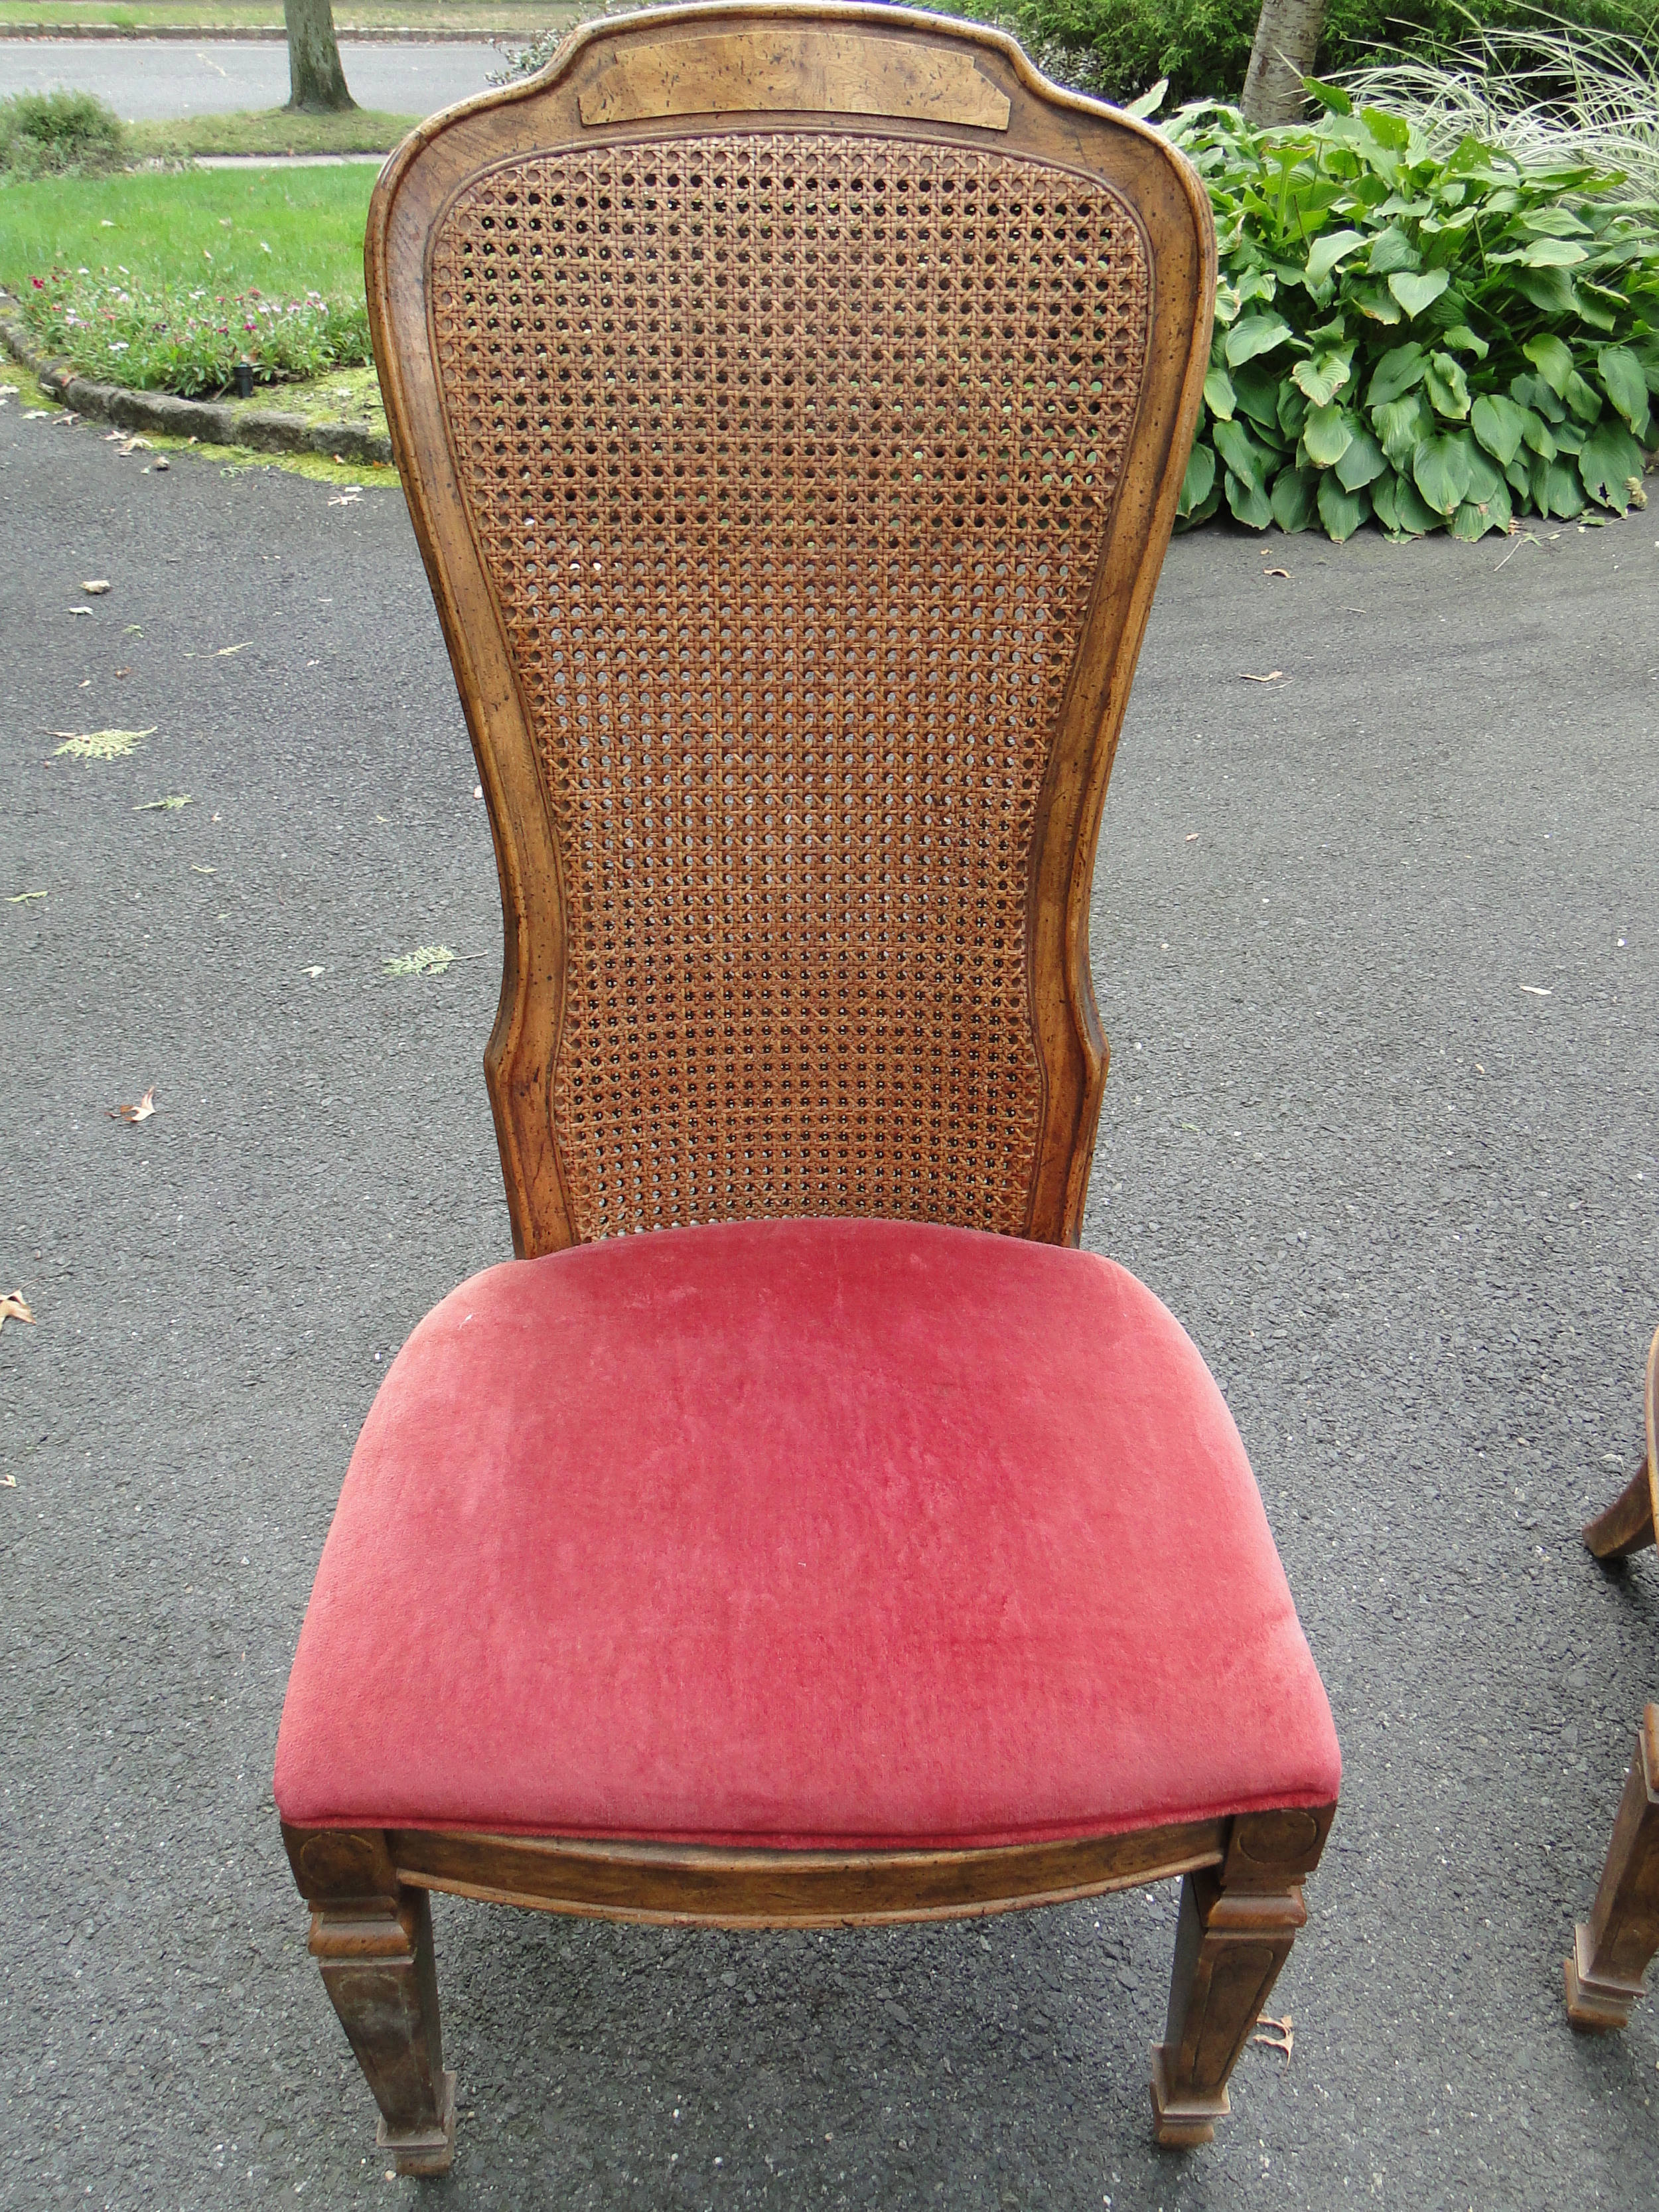 "Before" photo of chair